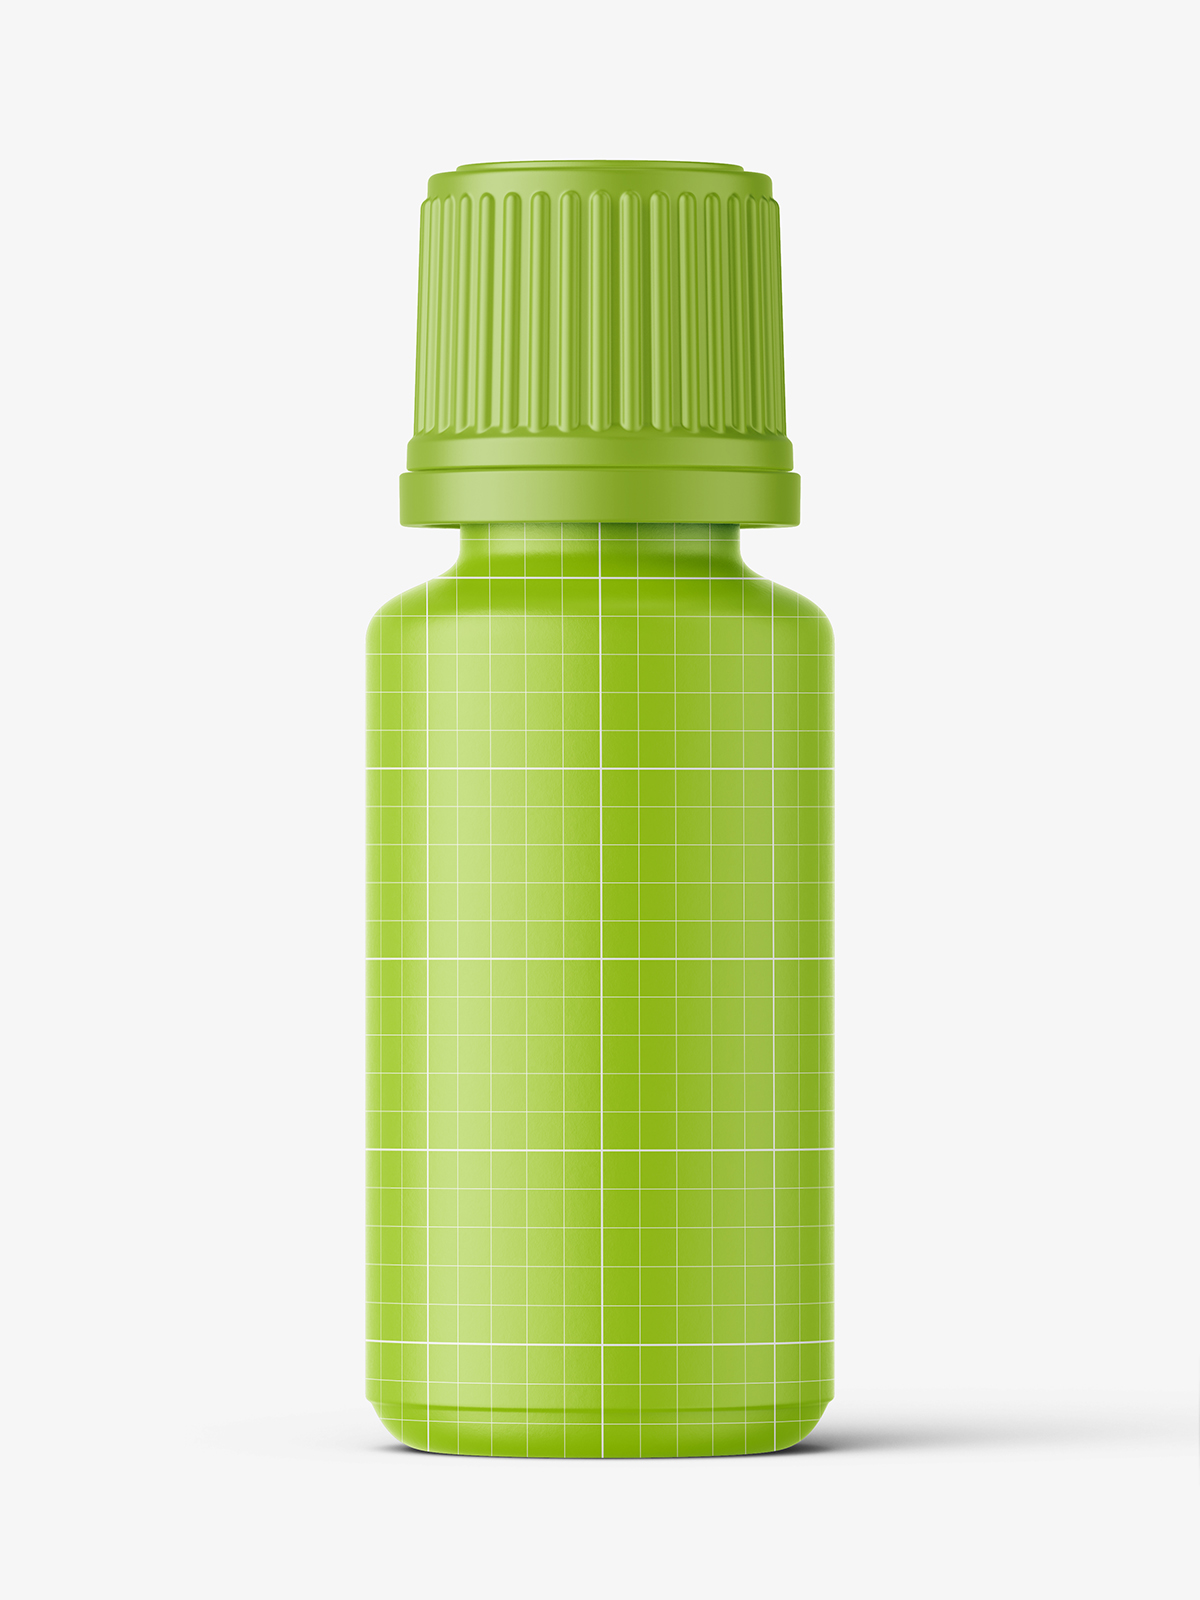 Download Clear bottle with pills mockup / 15 ml - Smarty Mockups